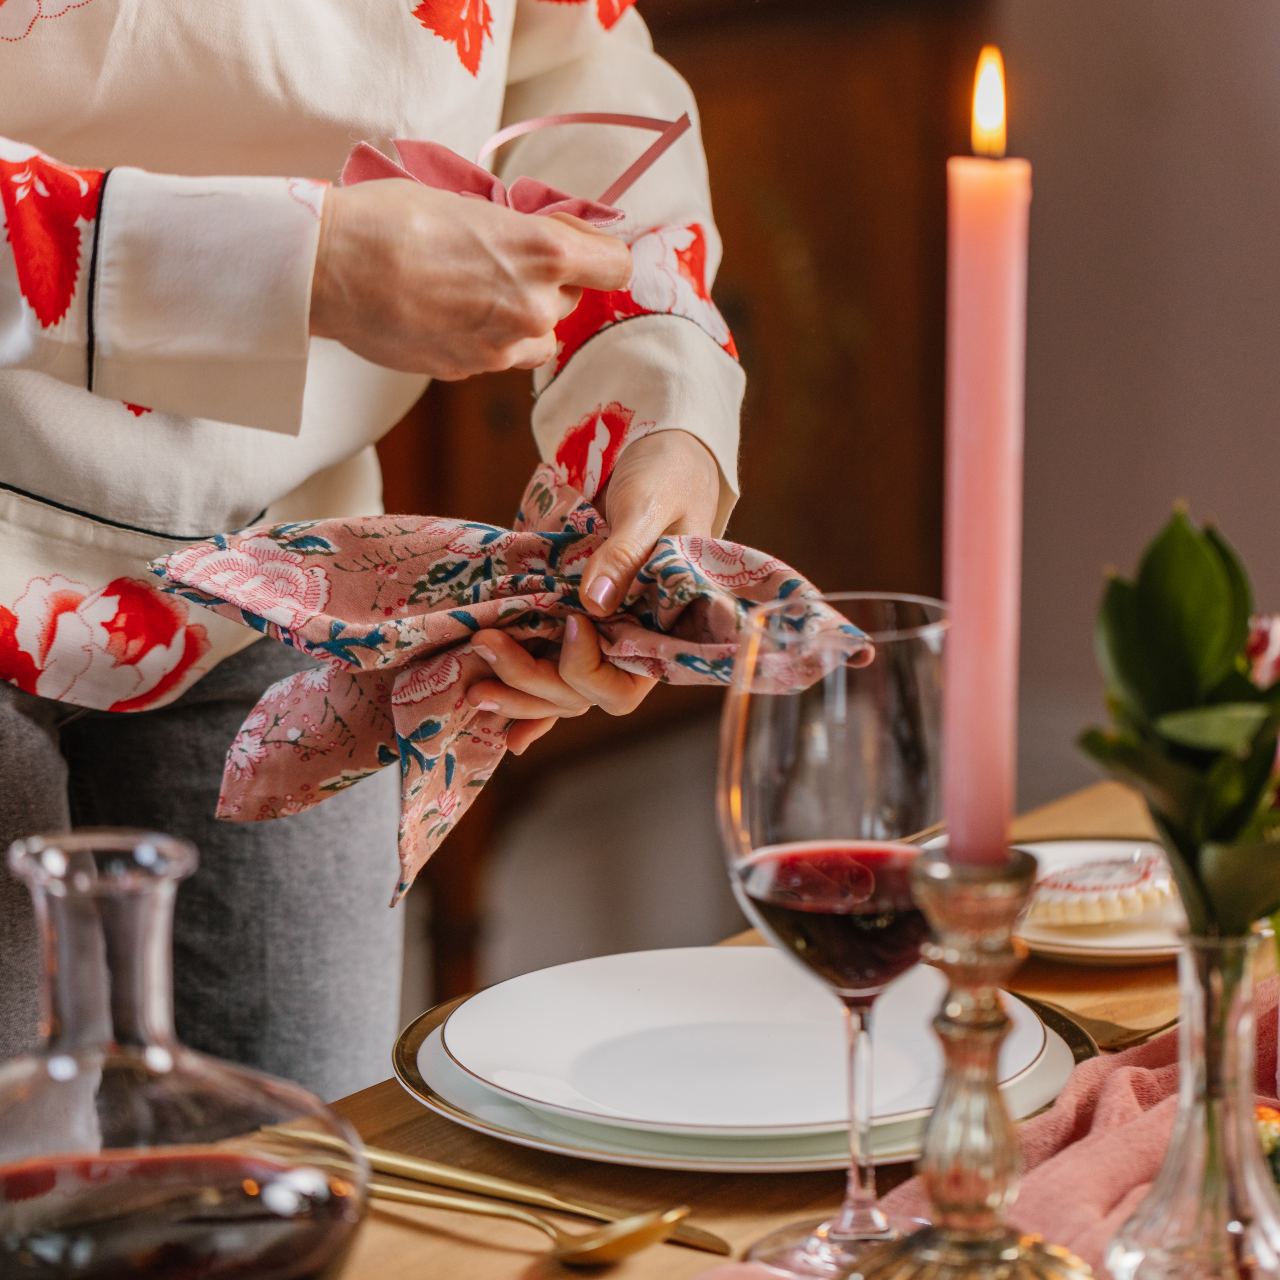 Hands tying a pink cotton napkin with peony flower pattern next to a pink dinner candle, burnished candle holder and carafe of red wine.